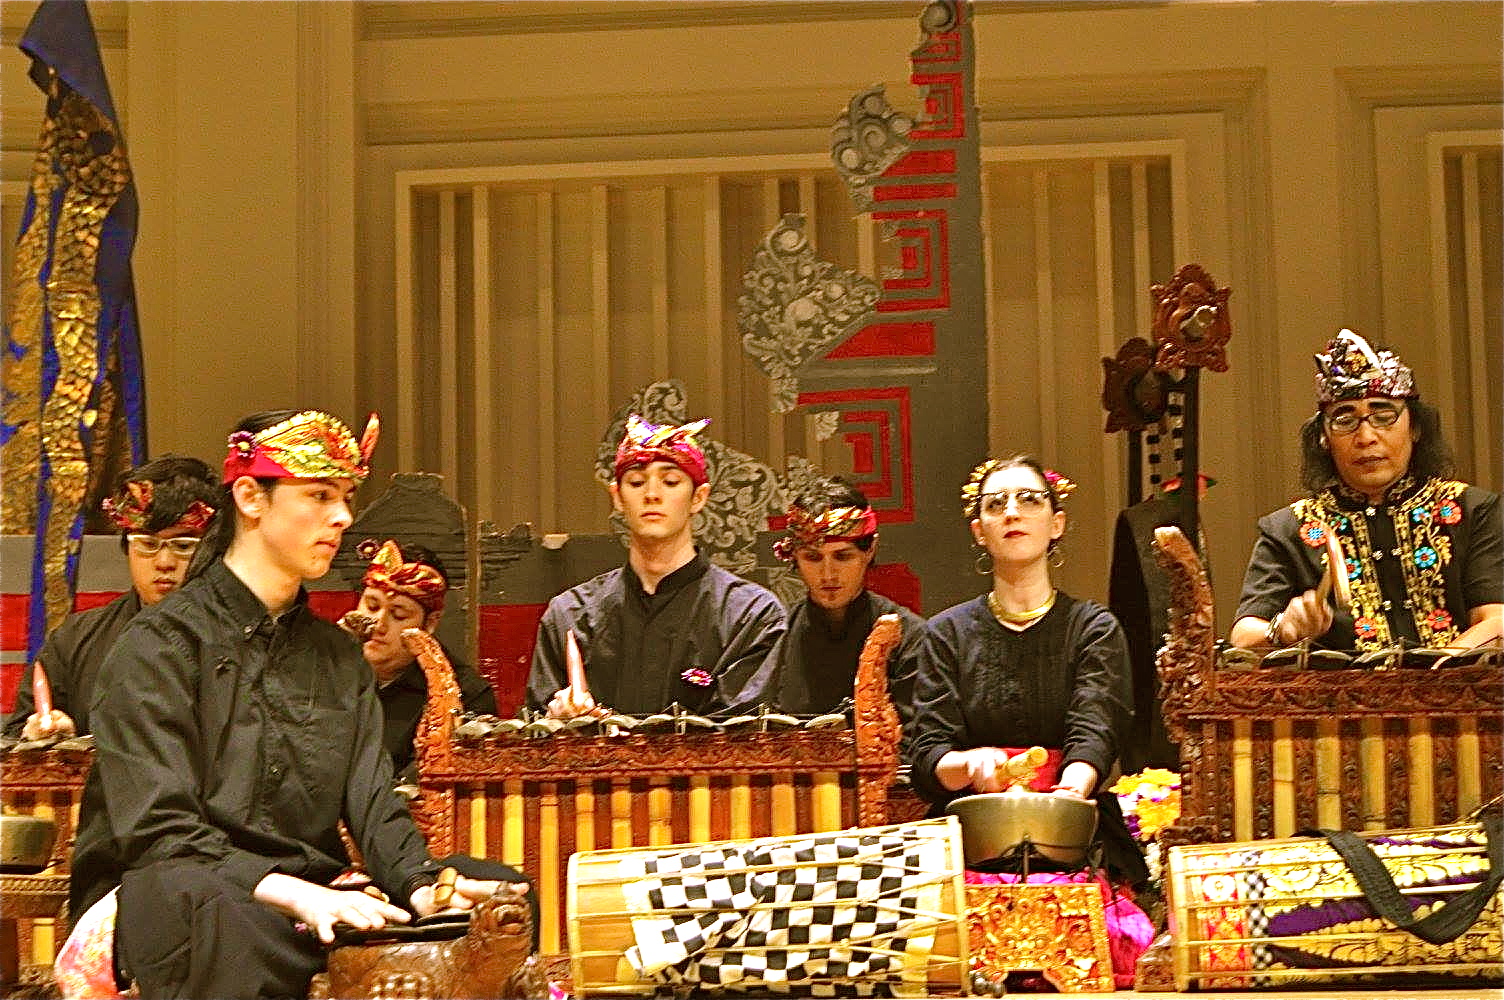 A Balinese Gamelan ConcertFeaturing&#8203; &#8203;The Sounds of Bali&nbsp;